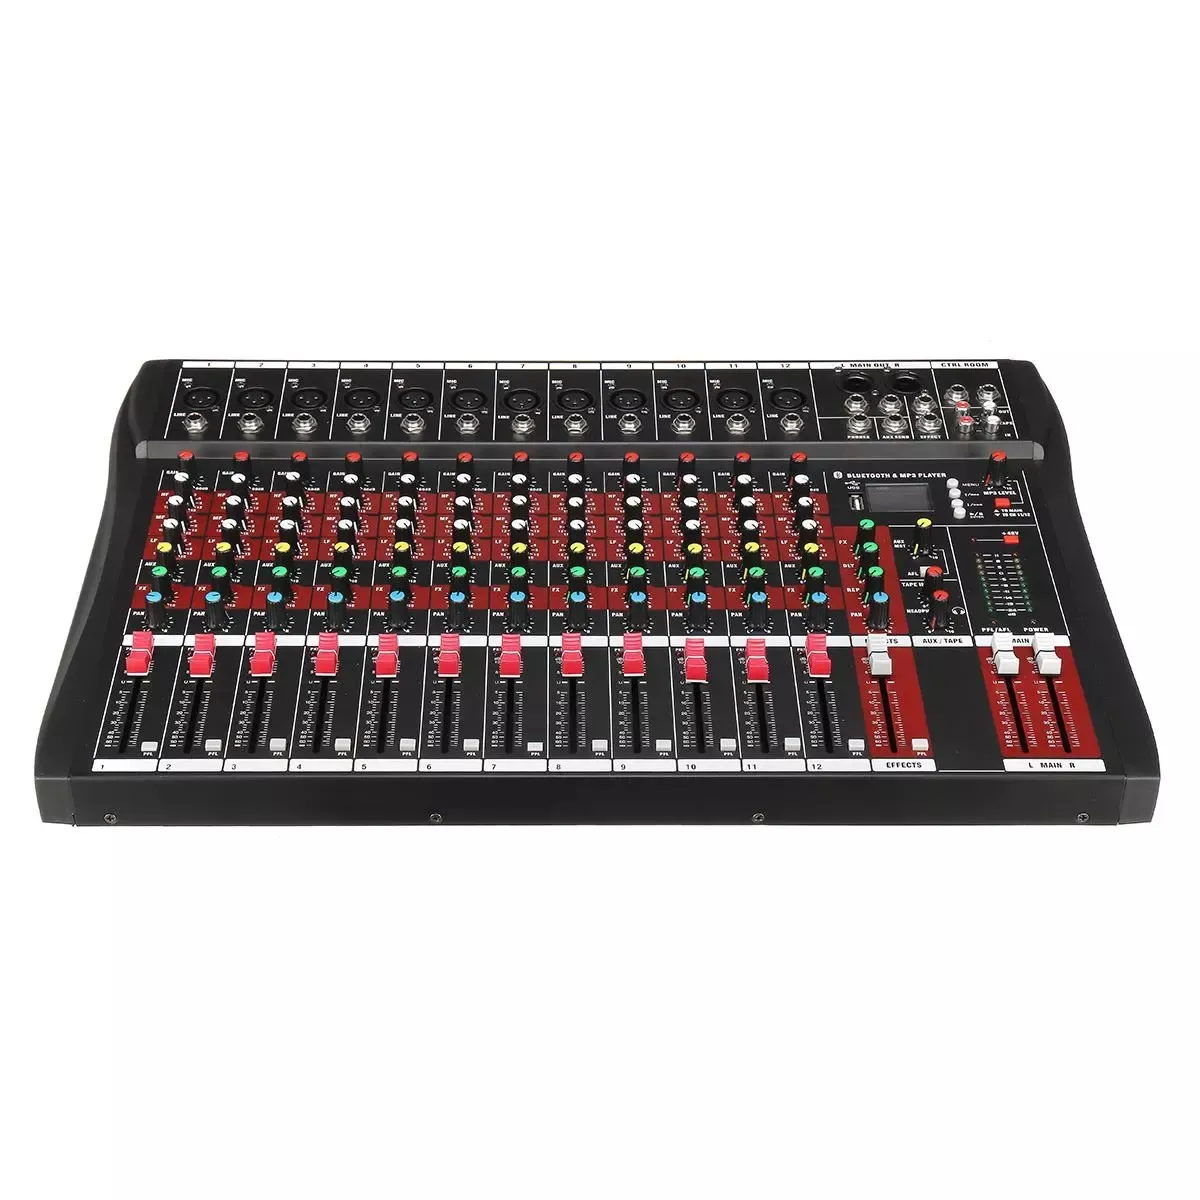 Cinese fornitore professionale dj controller digital mixing console mixer audio